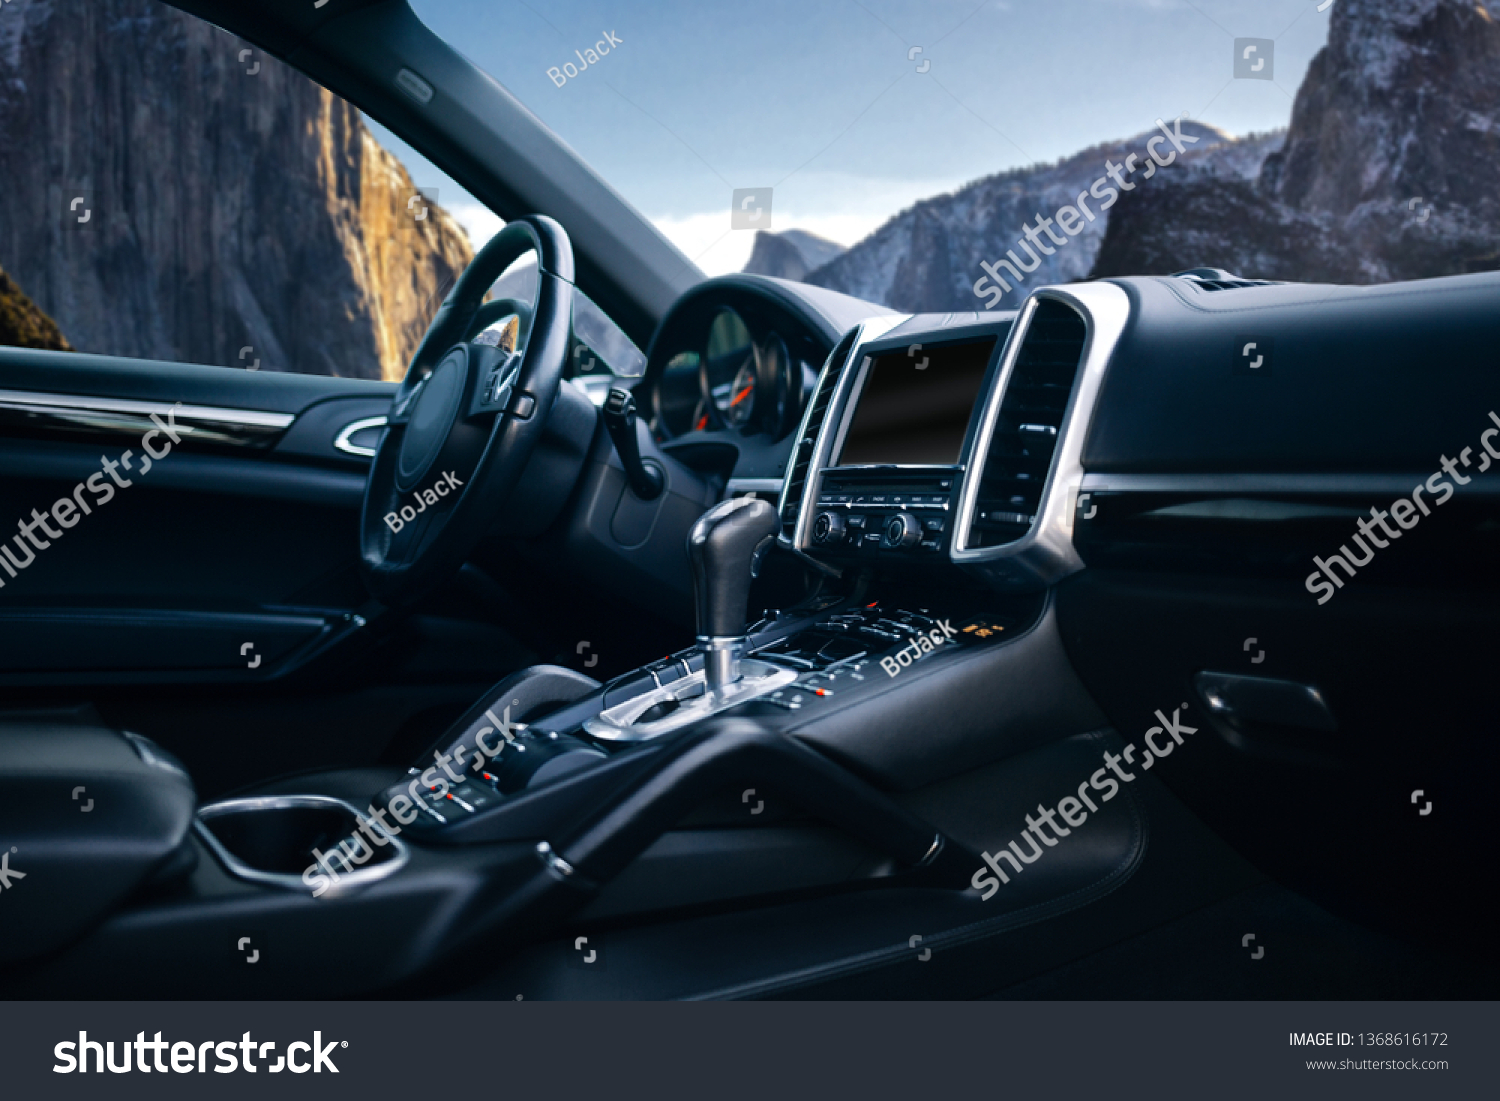 Expensive suv car interior with the steering wheel, multimedia dashboard, and gearbox handle #1368616172